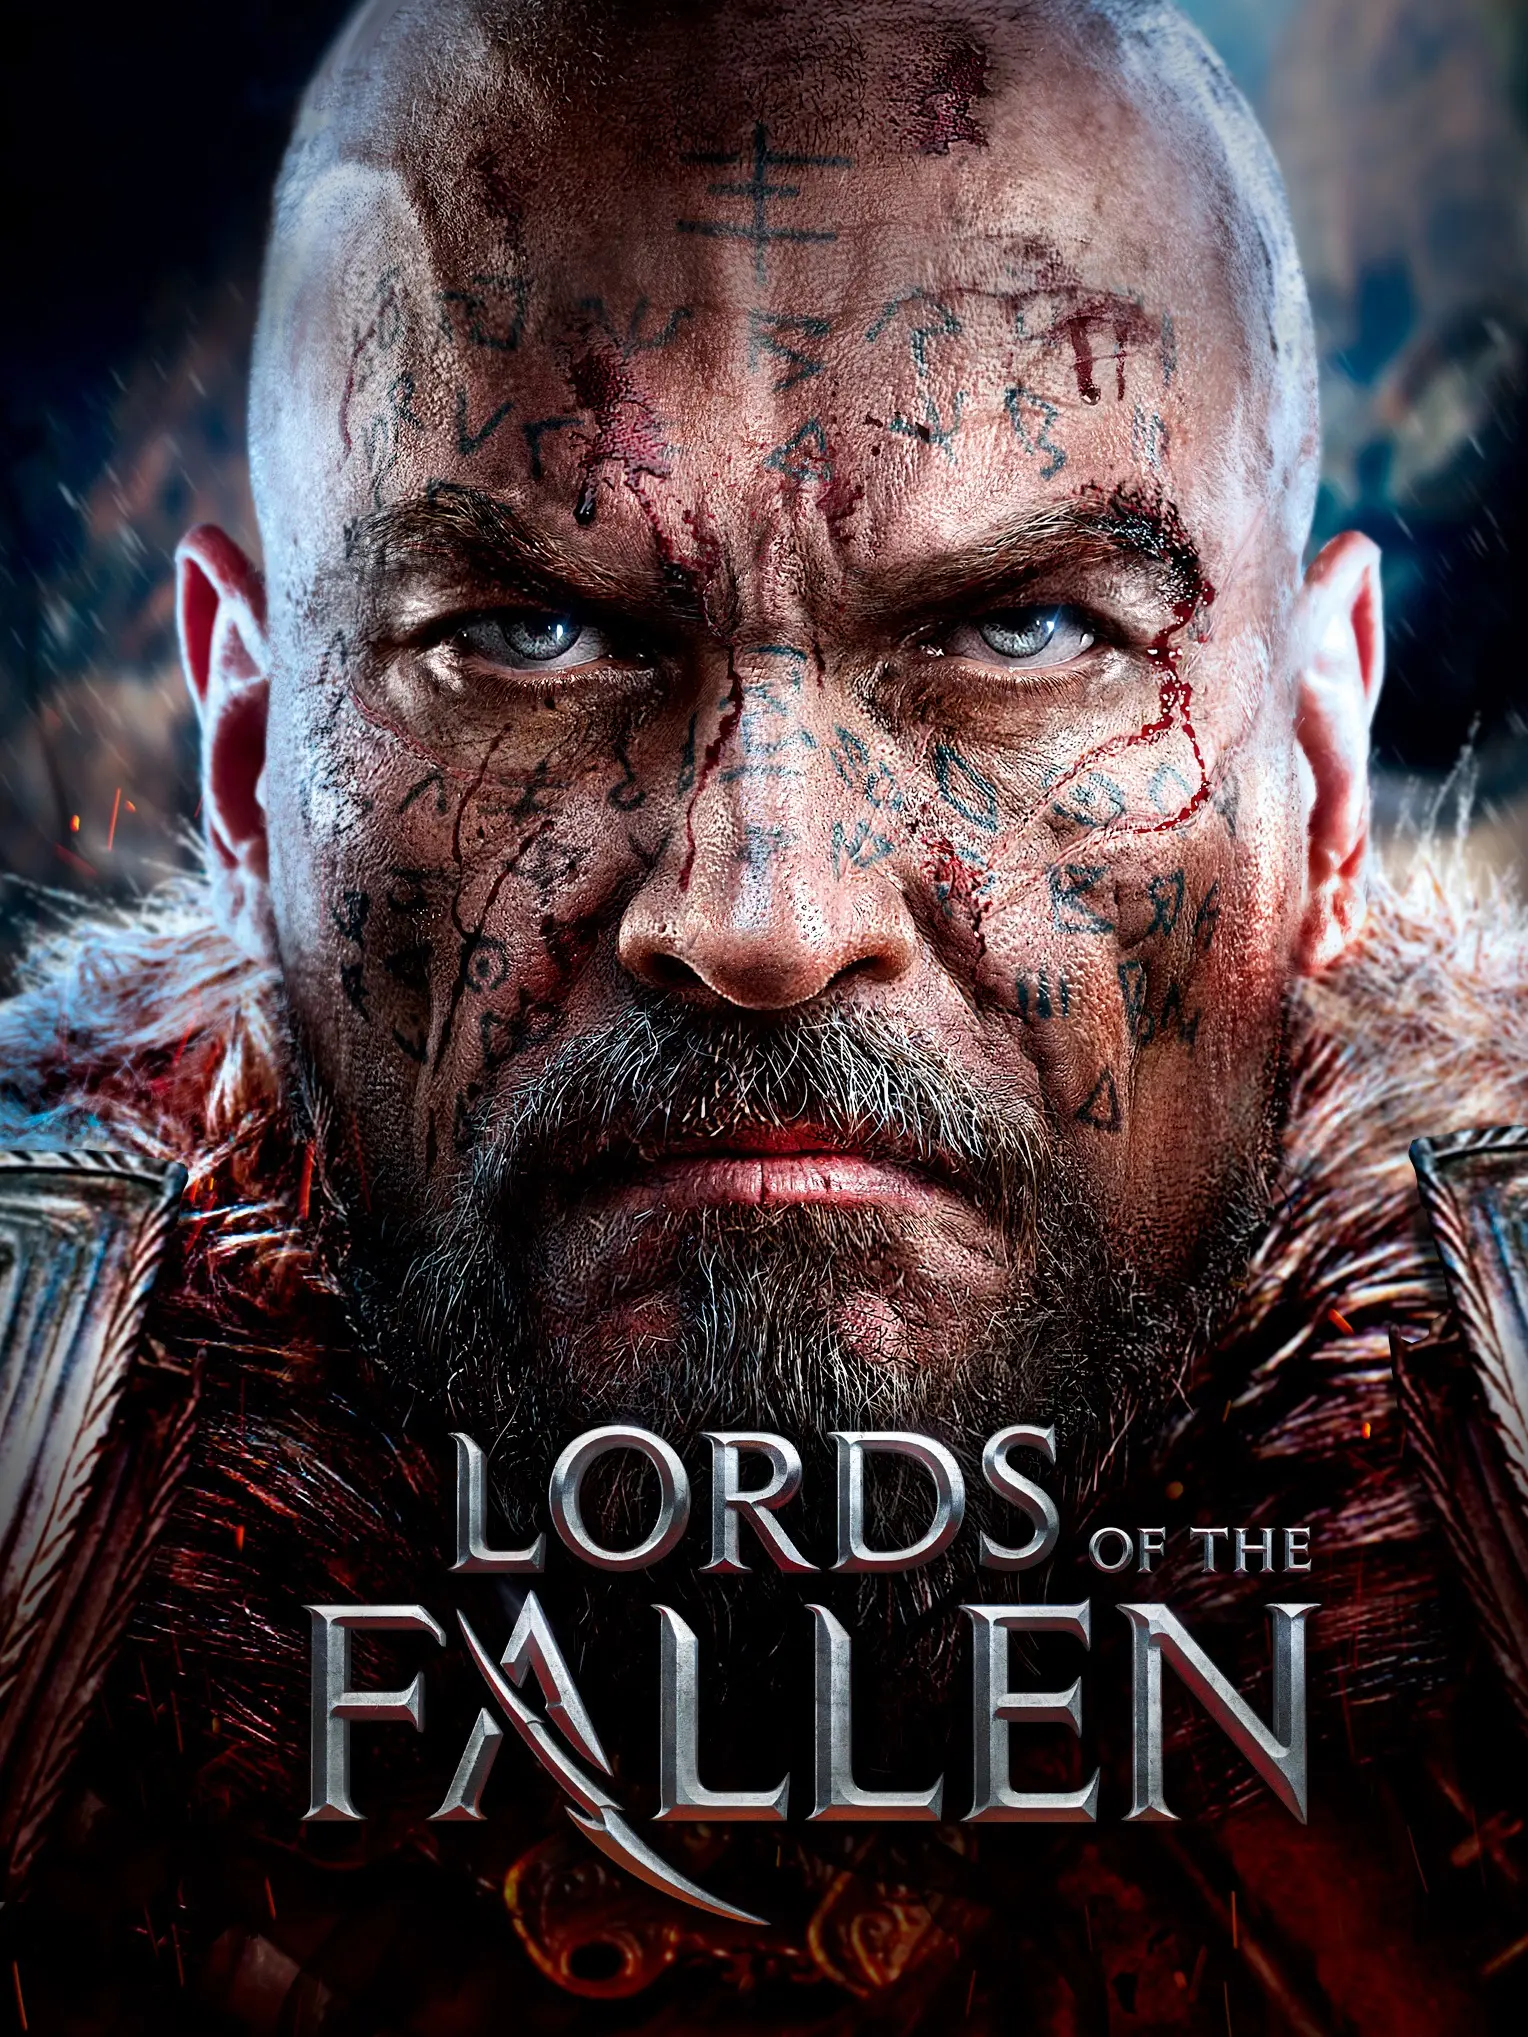 Lords Of The Fallen Digital Deluxe Edition (PC) - Steam - Digital Code